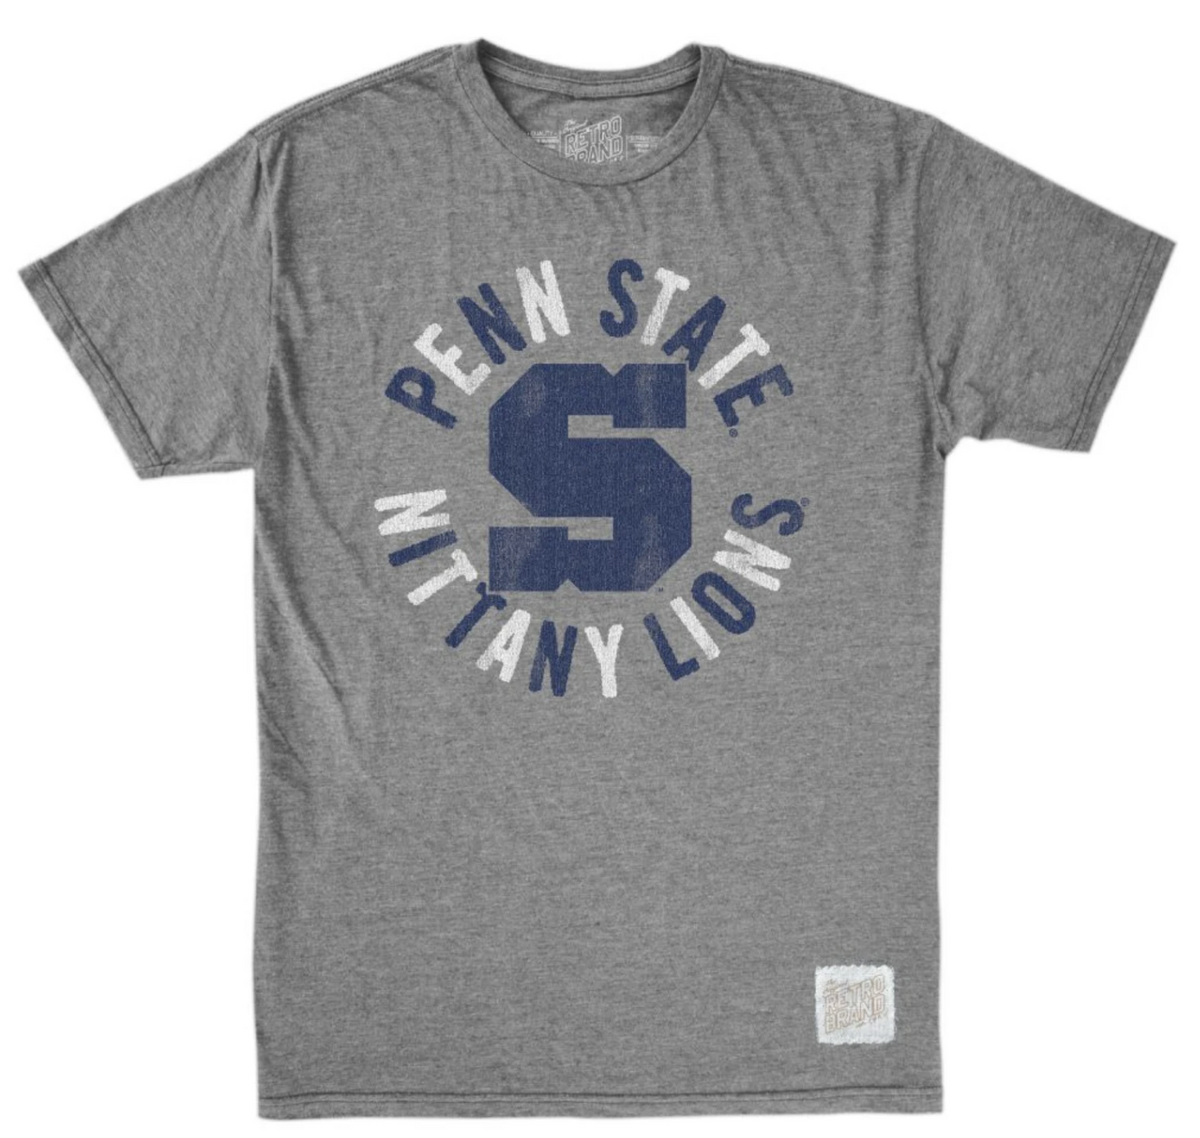 Penn State Nittany Lions Duo-Blend Tee